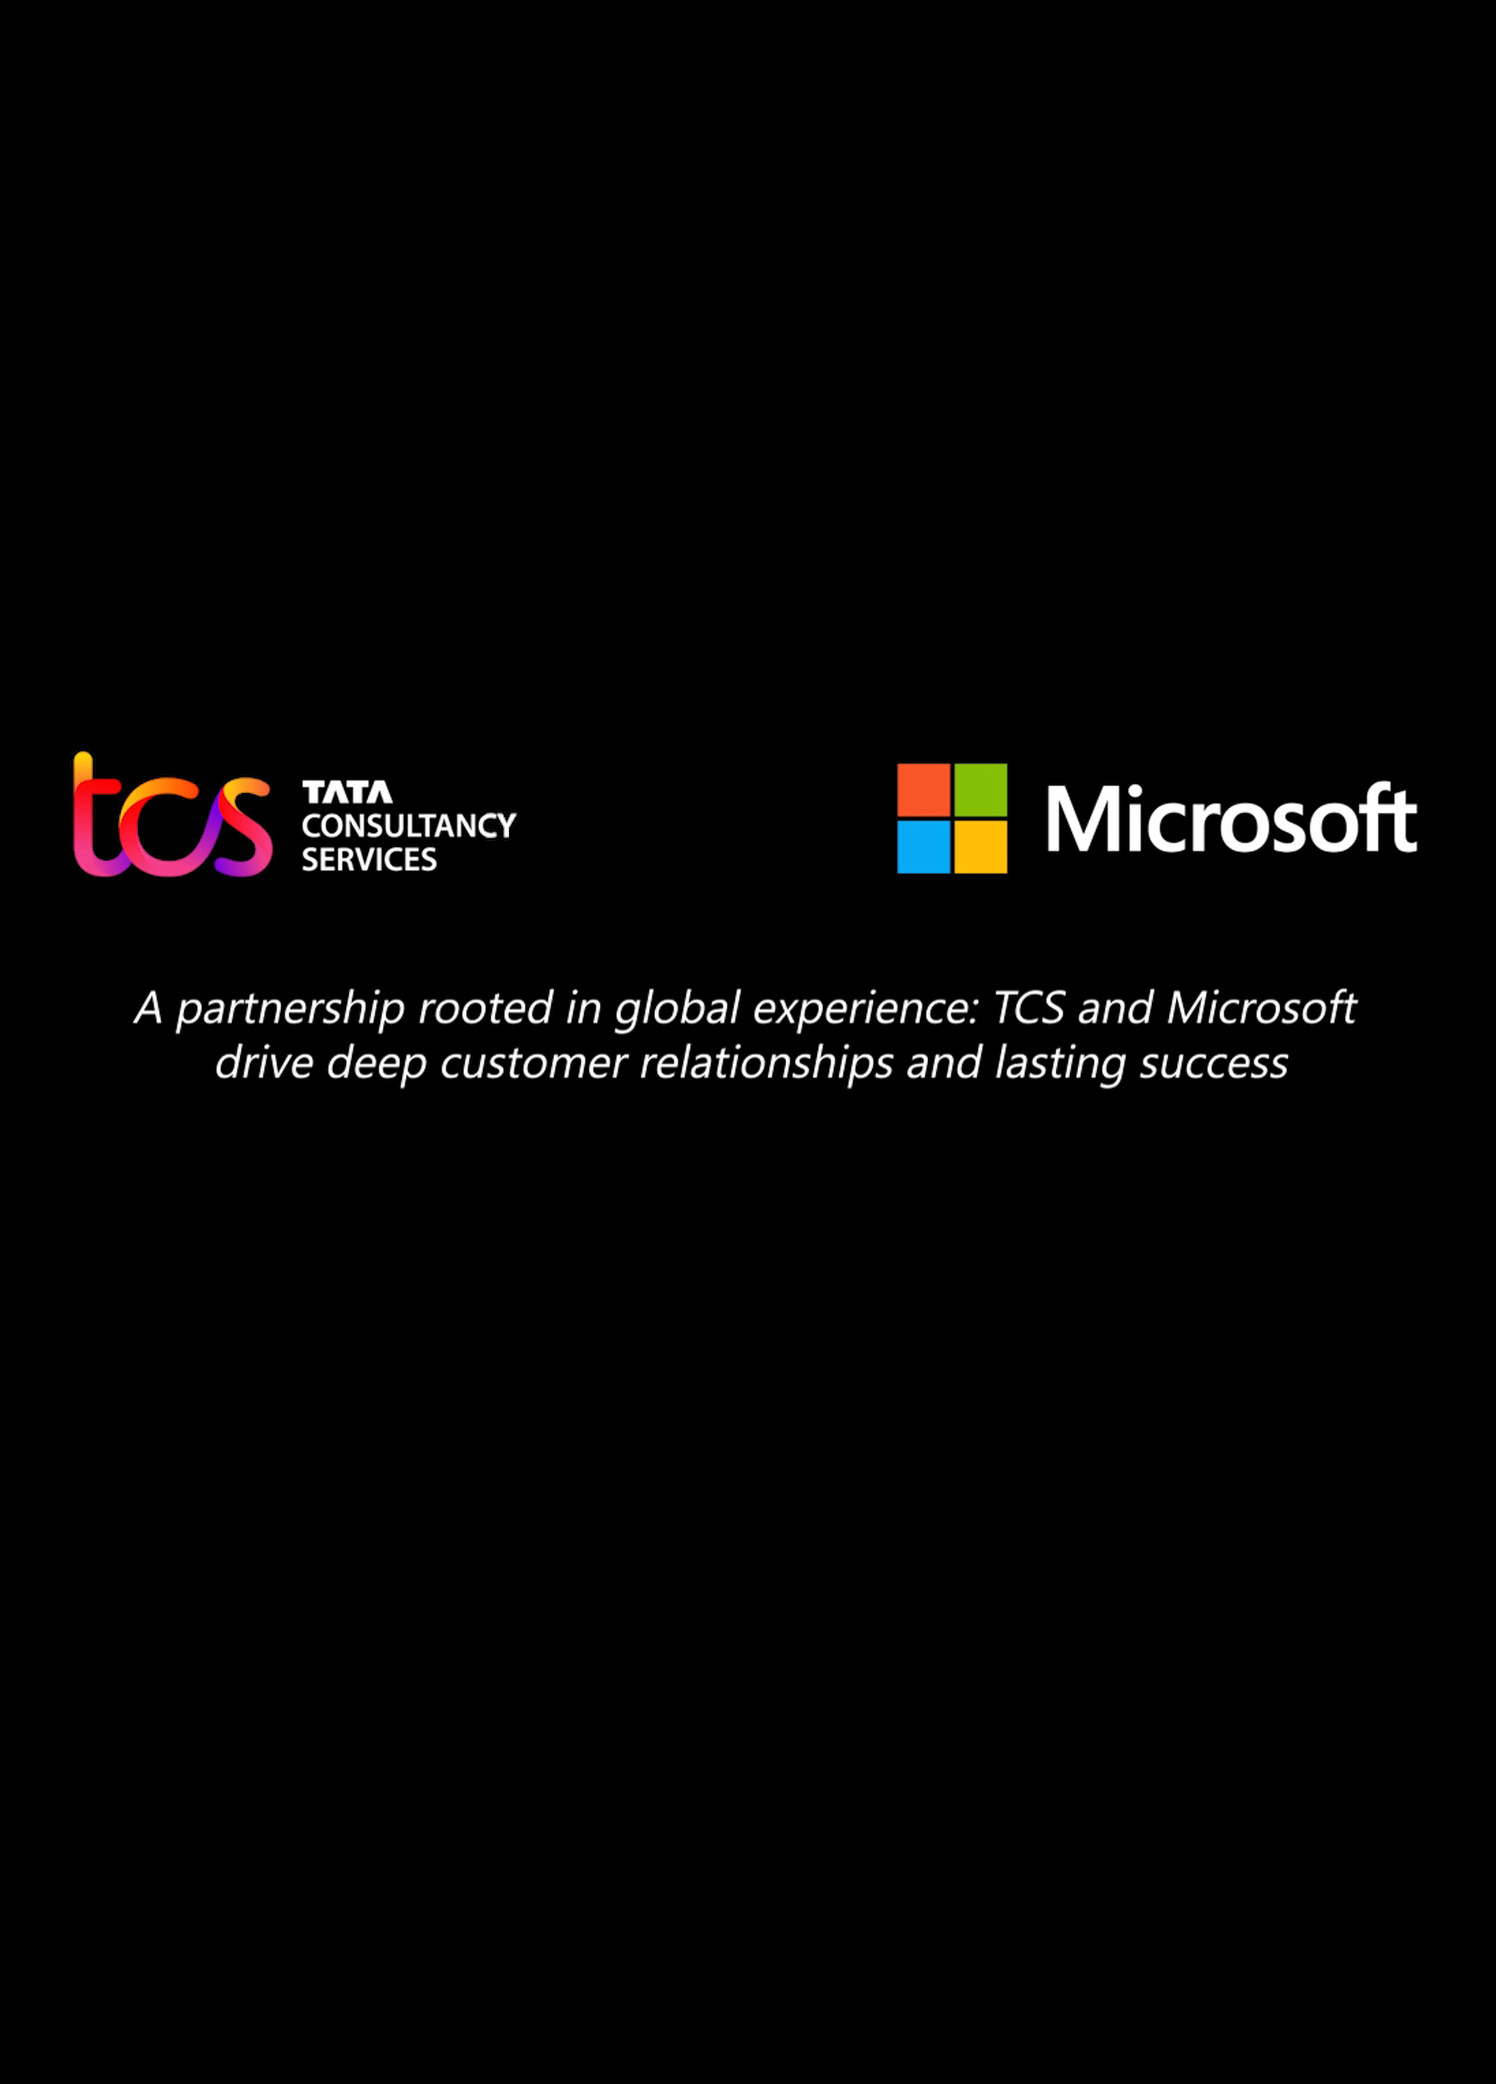 A partnership rooted in global experience: TCS and Microsoft drive deep customer relationships and lasting success